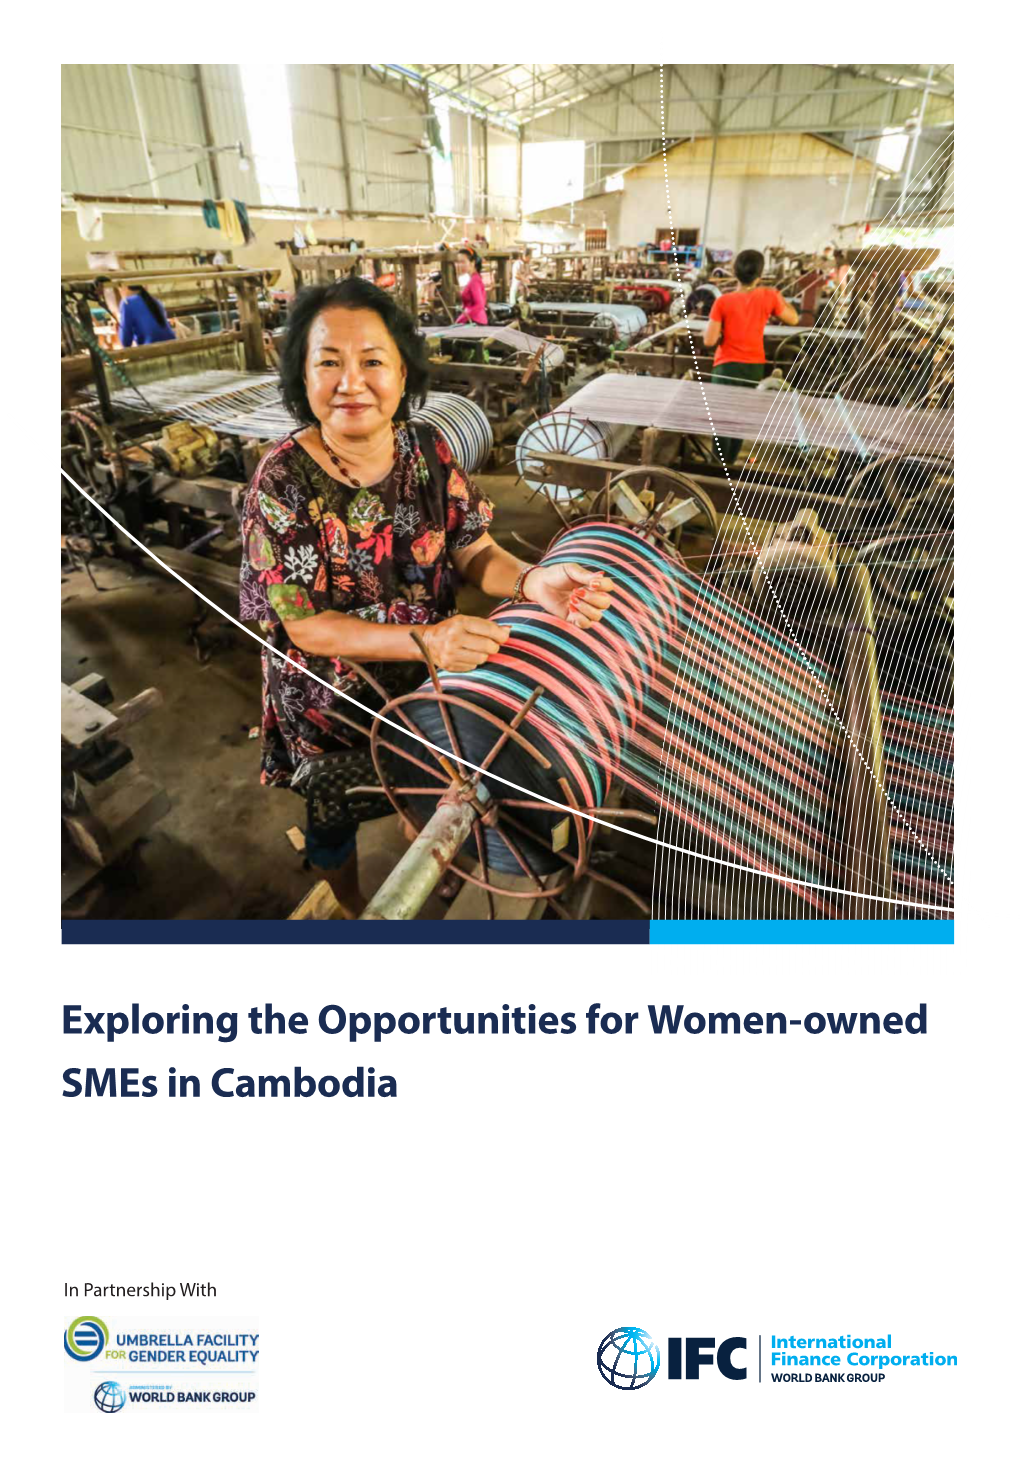 Report: Exploring the Opportunities for Women-Owned Smes in Cambodia